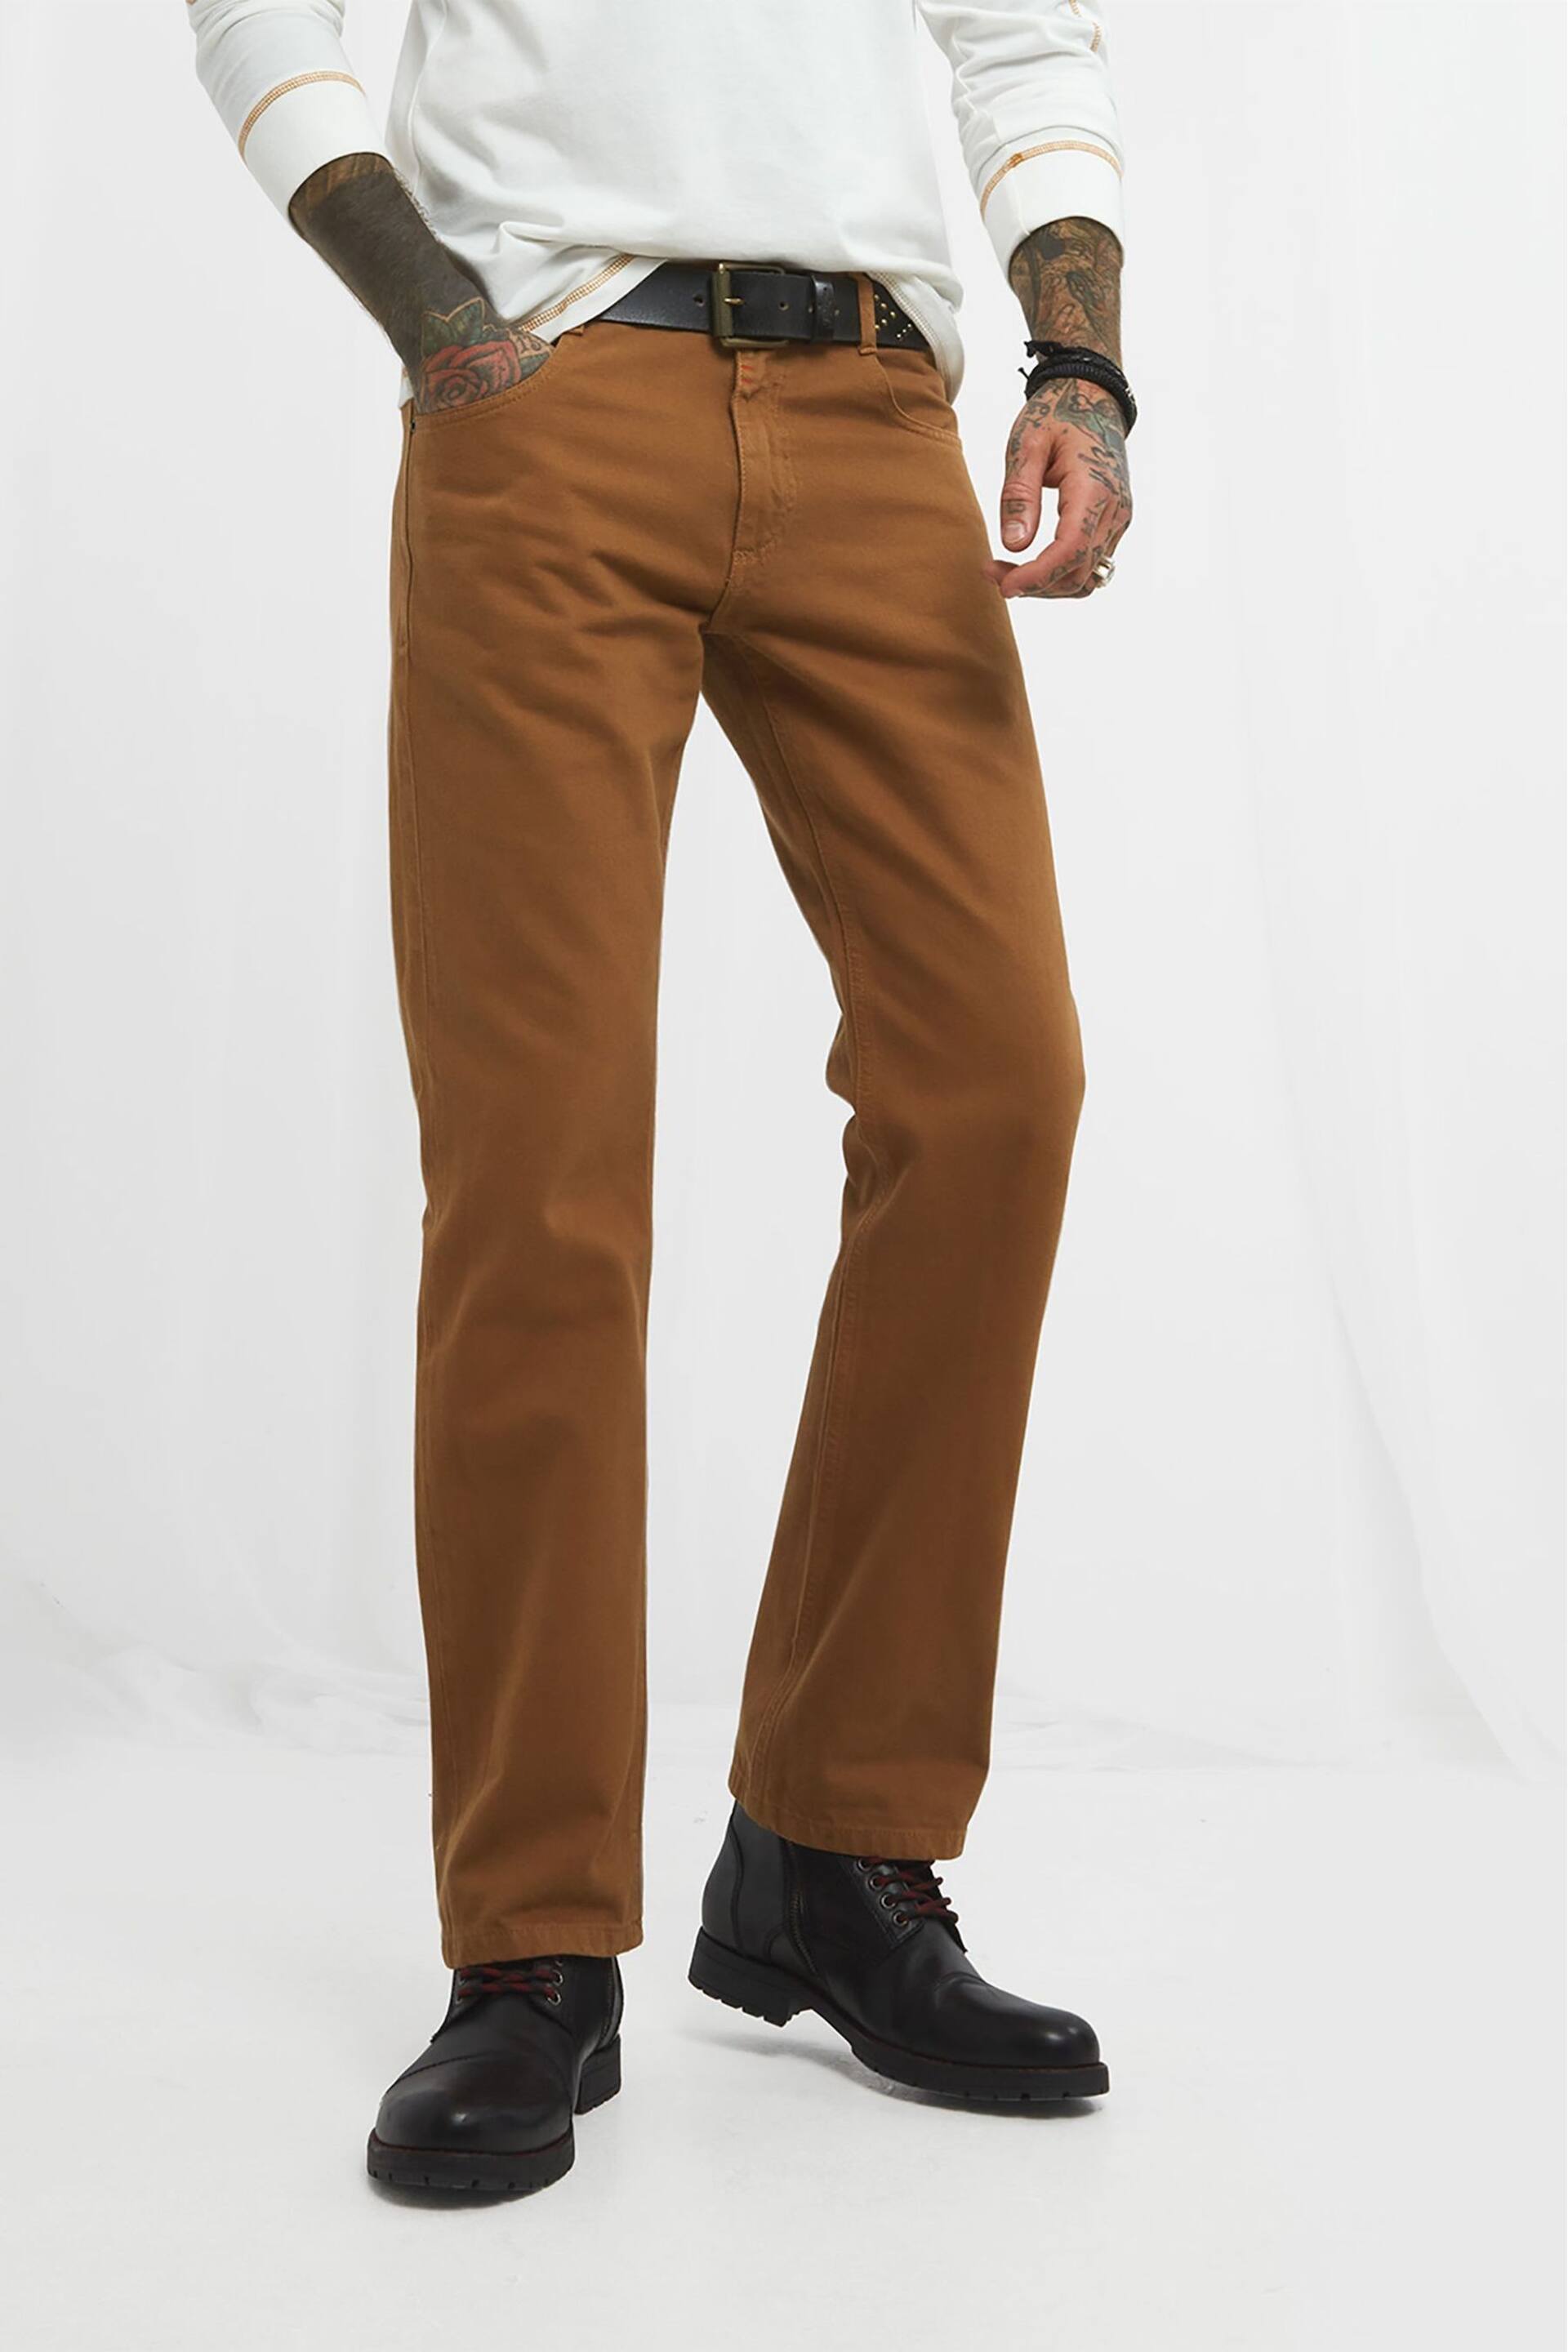 Joe Browns Brown Standout Coloured Denim Jean Trousers - Image 1 of 5